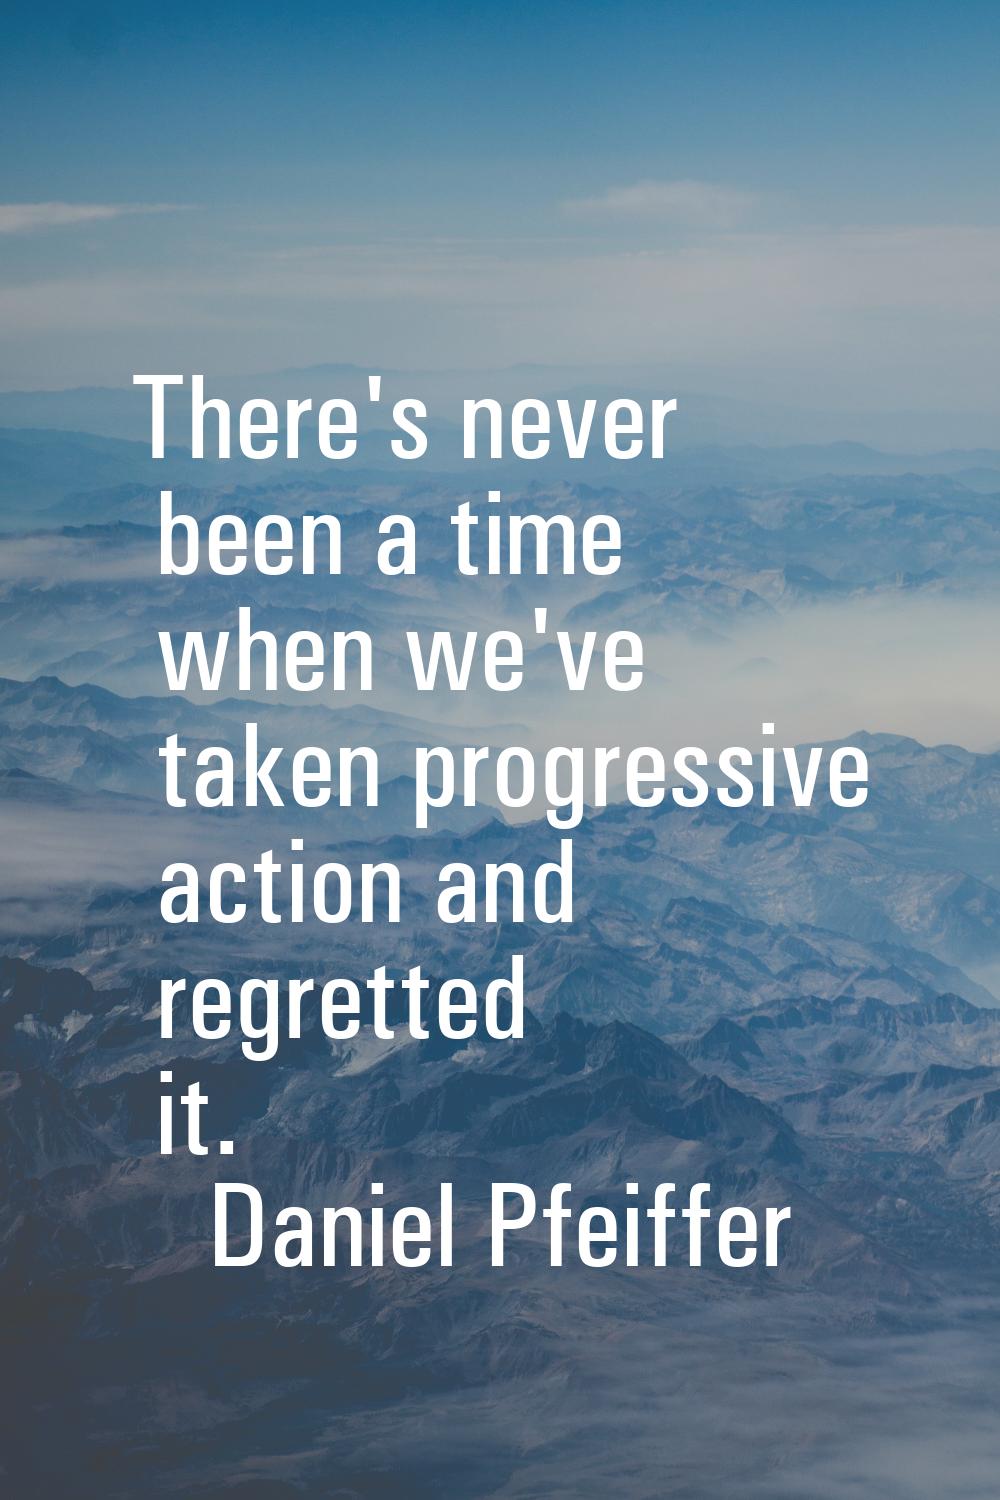 There's never been a time when we've taken progressive action and regretted it.